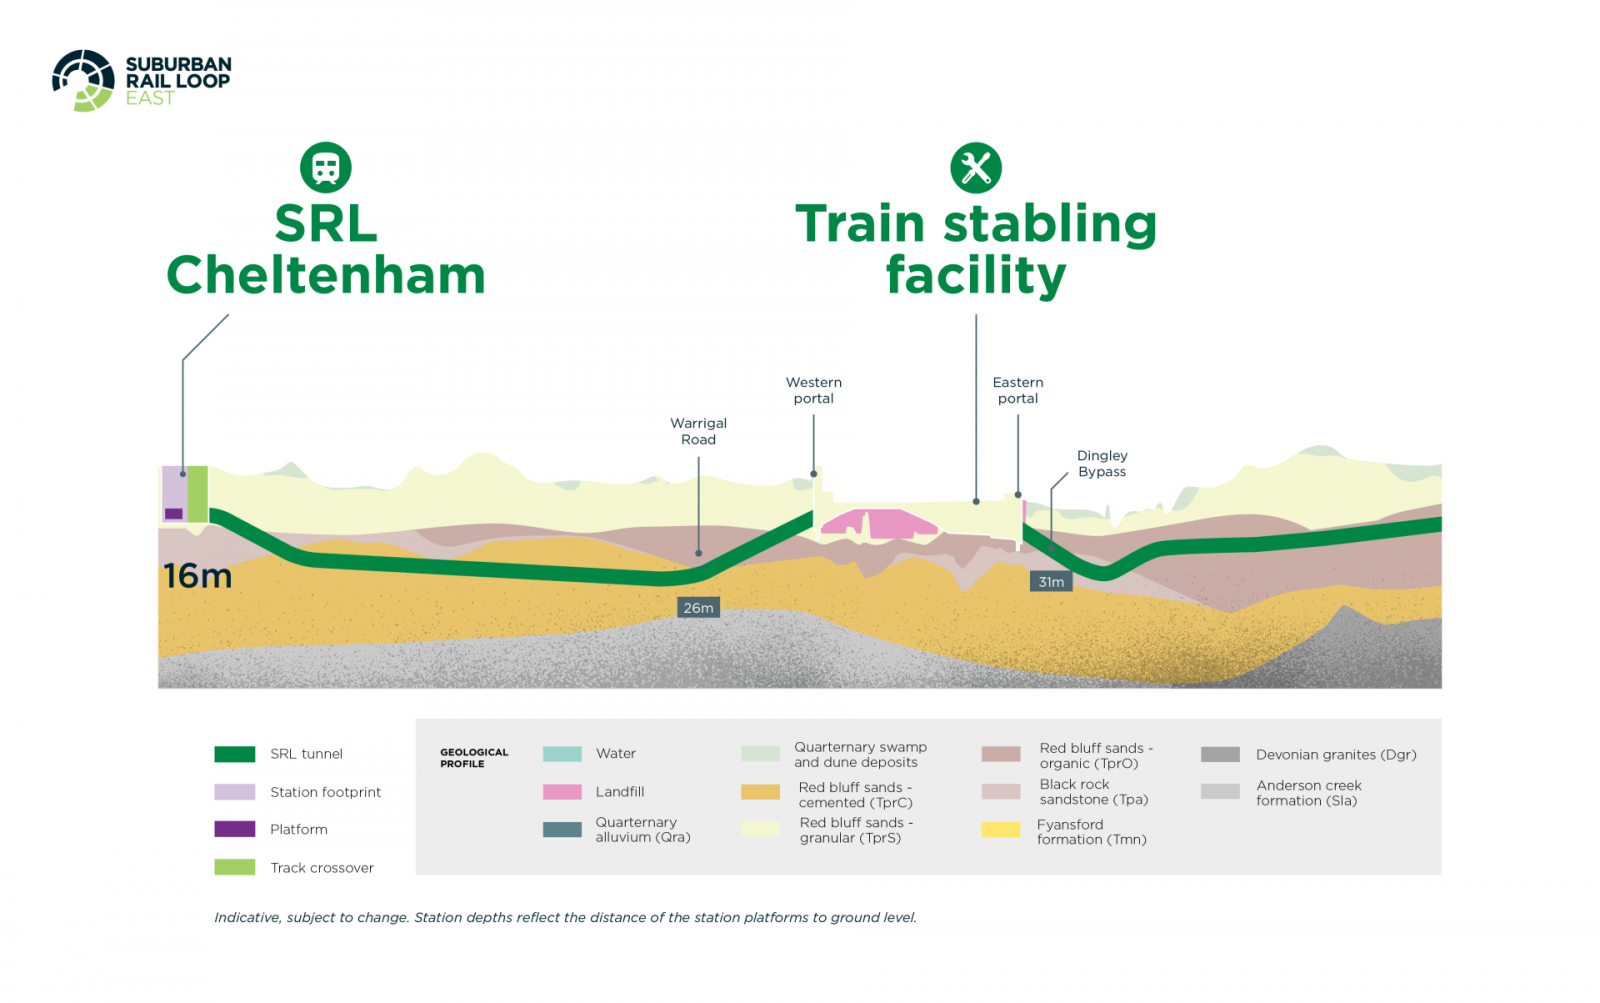 Diagram: The underground path of SRL East from Cheltenham to the Train stabling facility. Depth from 16m to 26m to 31m.